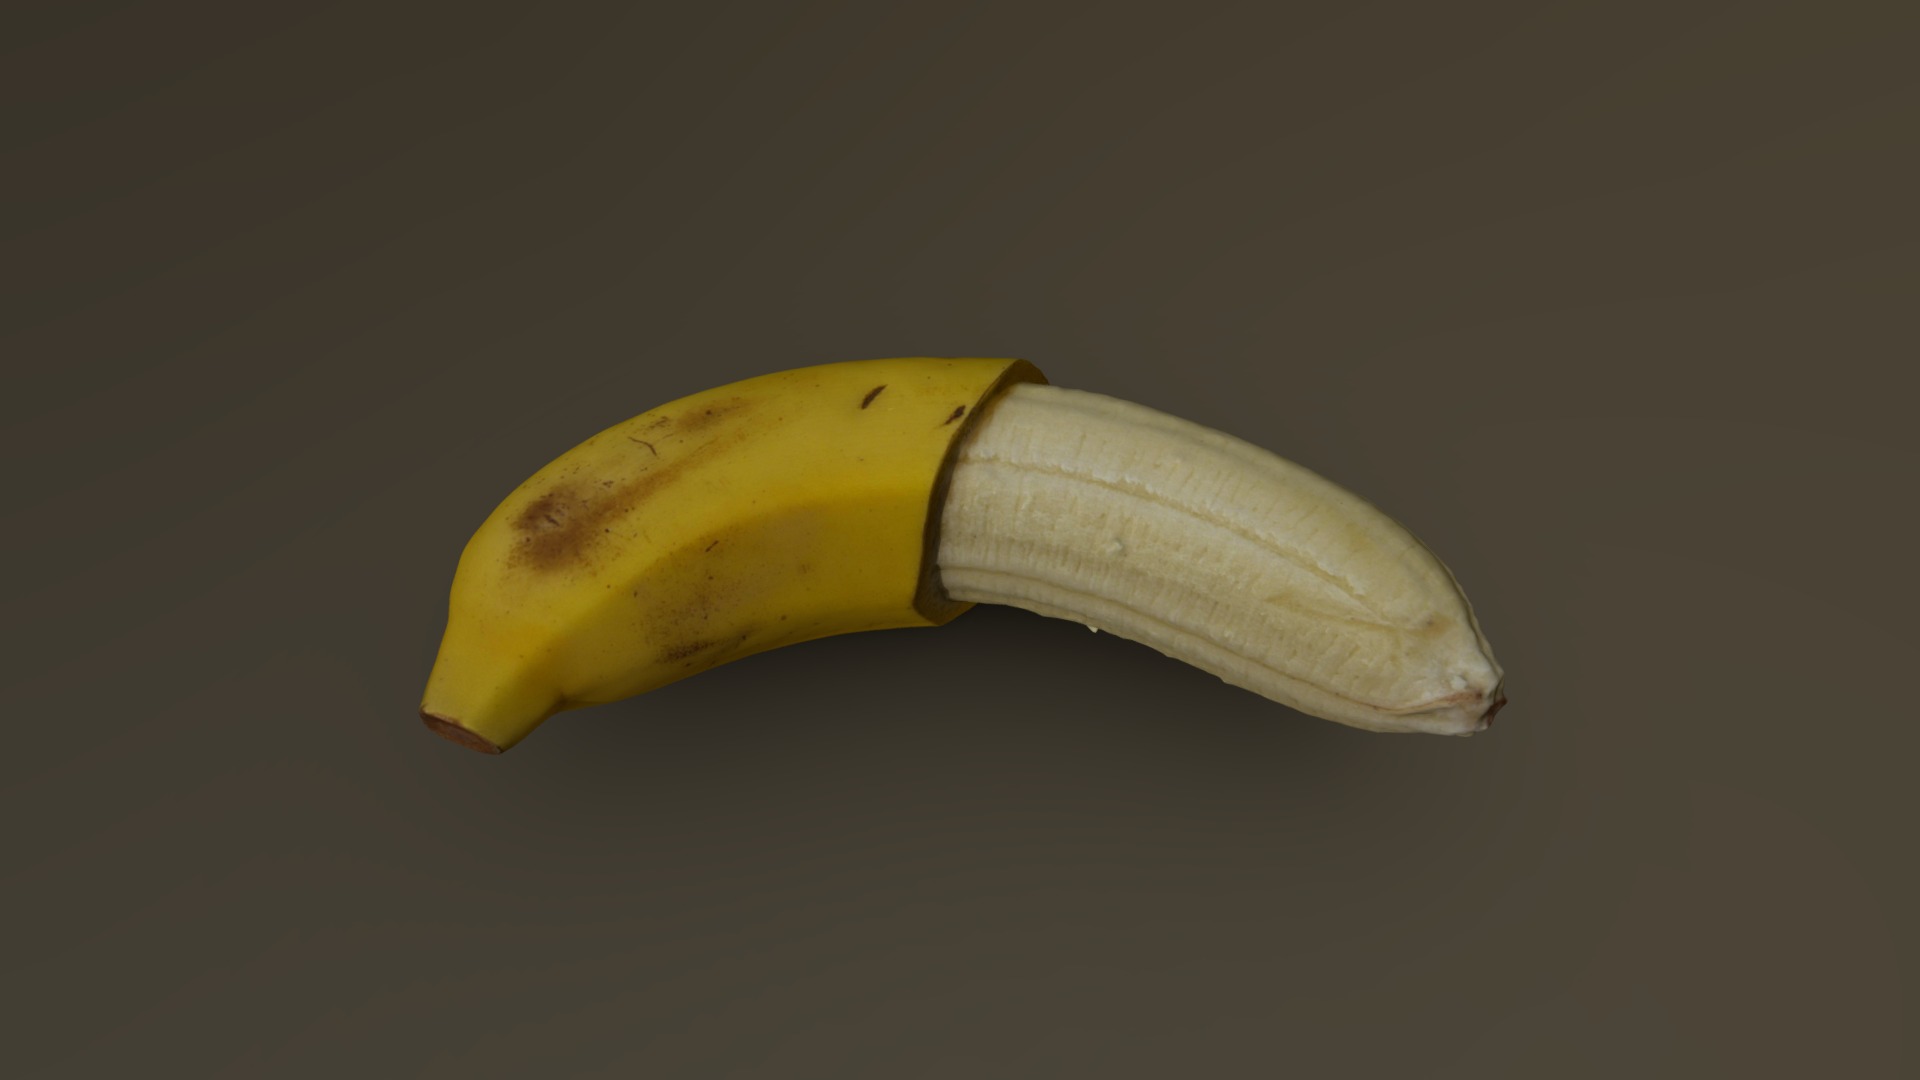 3D model Partially Peeled Banana 02 - This is a 3D model of the Partially Peeled Banana 02. The 3D model is about a banana on a white background.